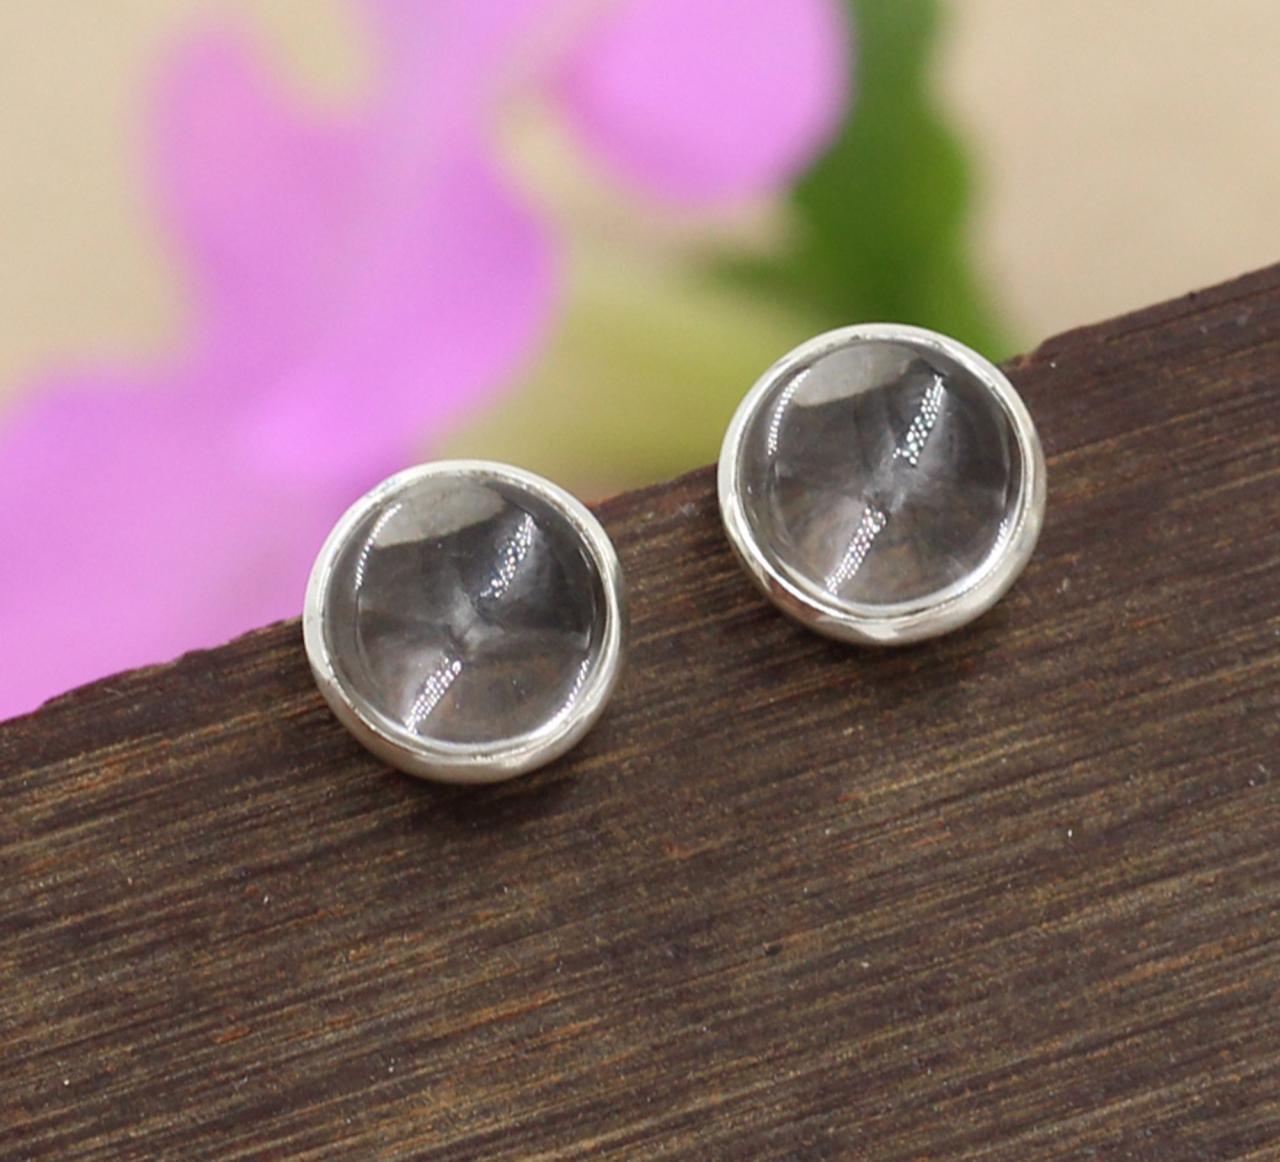 Crystal Quartz Gemstone Handmade Stud Earring Solid 925 Sterling Silver Jewelry Anniversary Gift, Year Gift,floral Jewelry